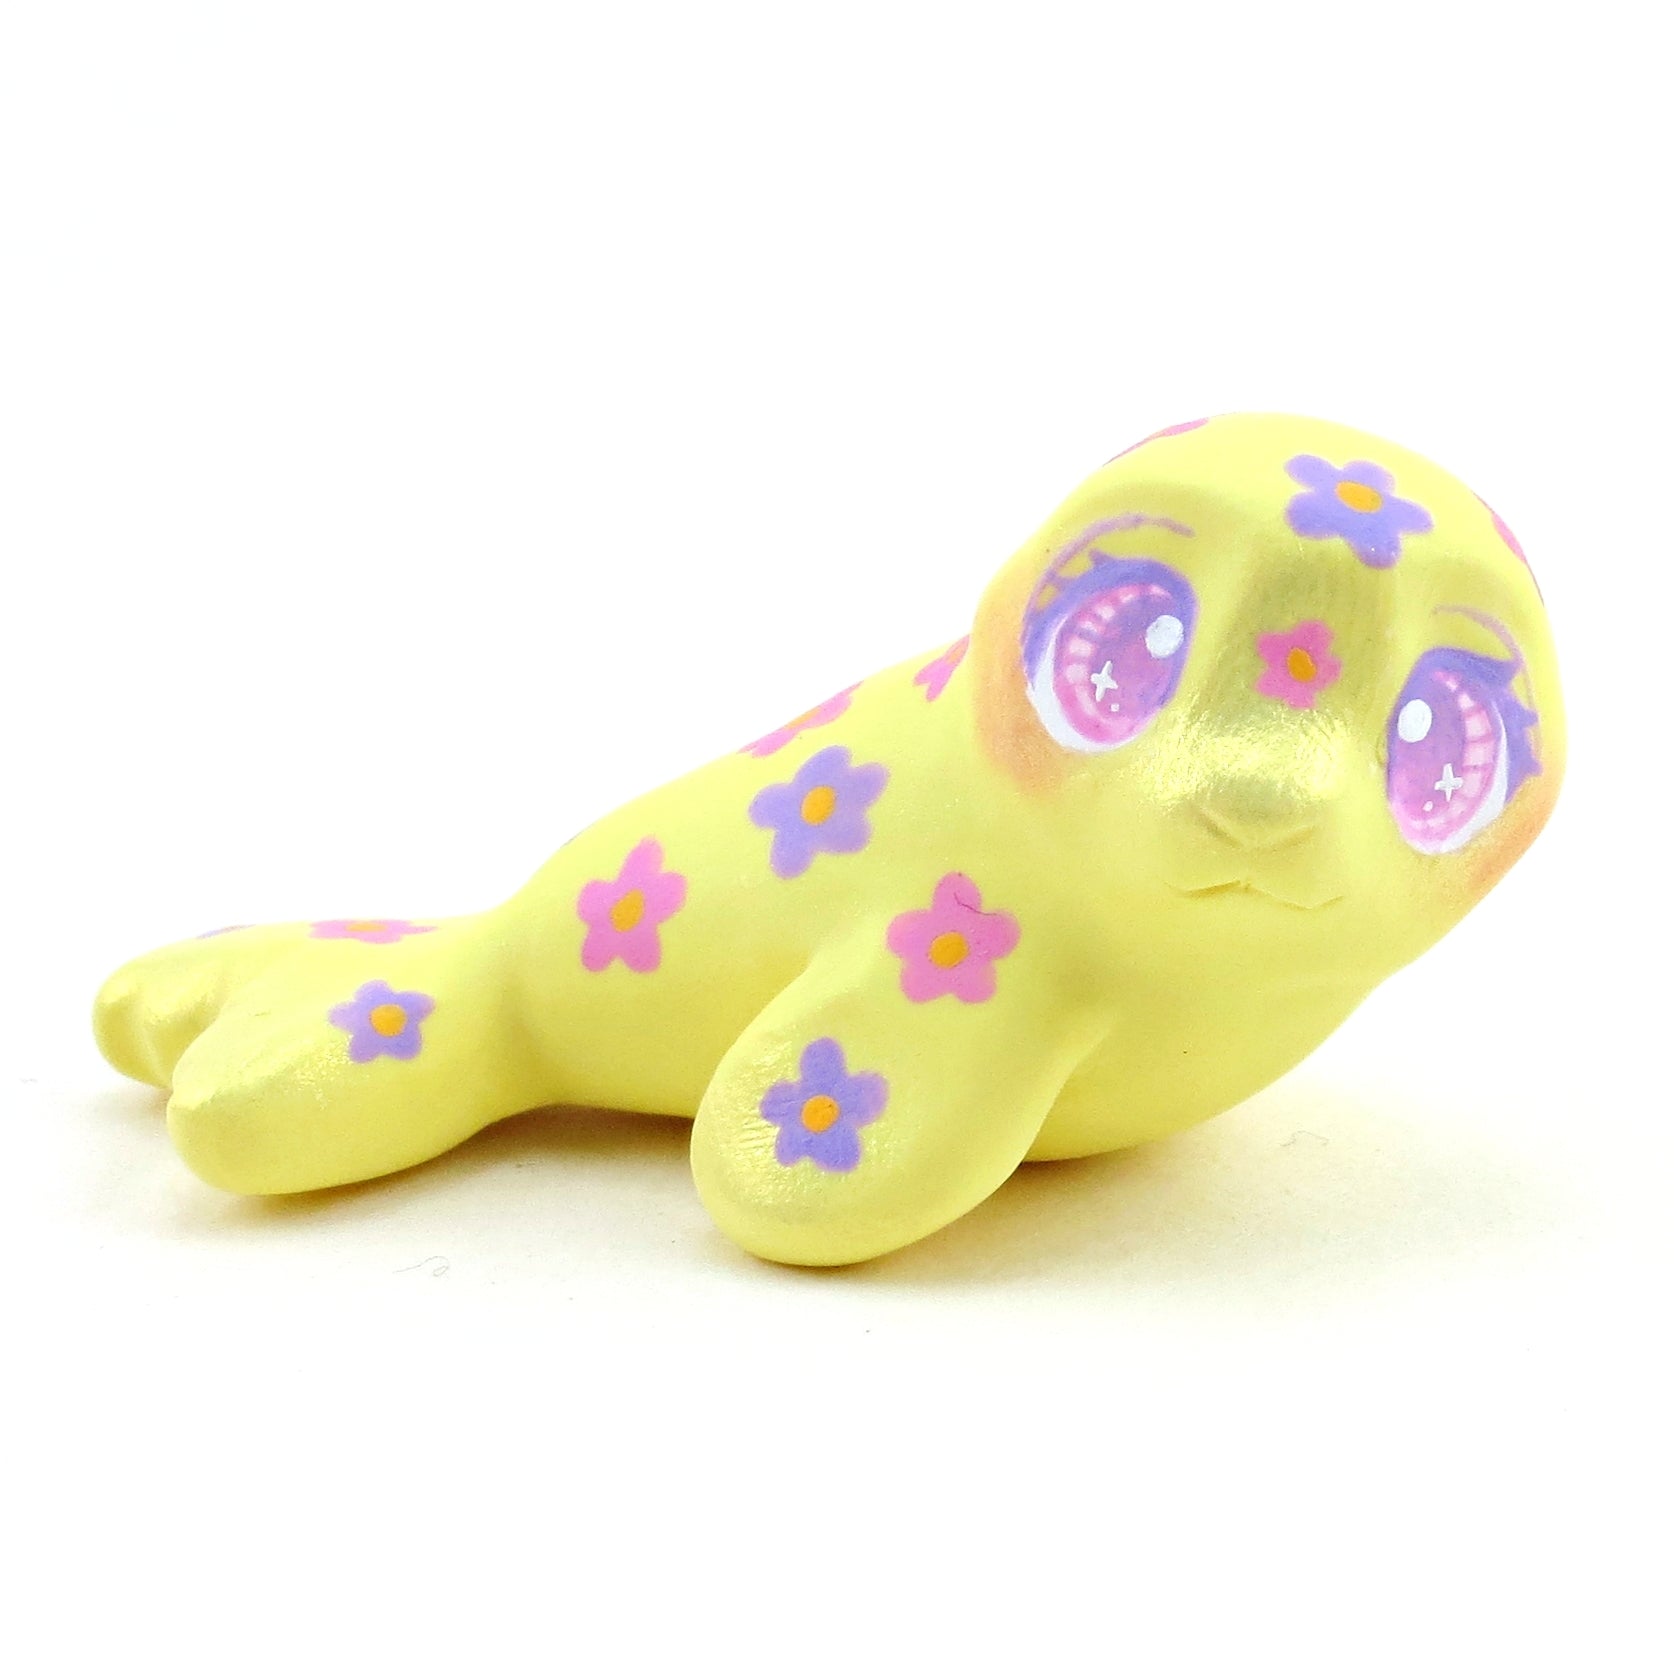 Doodle Flower Seal Figurine - Polymer Clay Doodle Ocean Collection